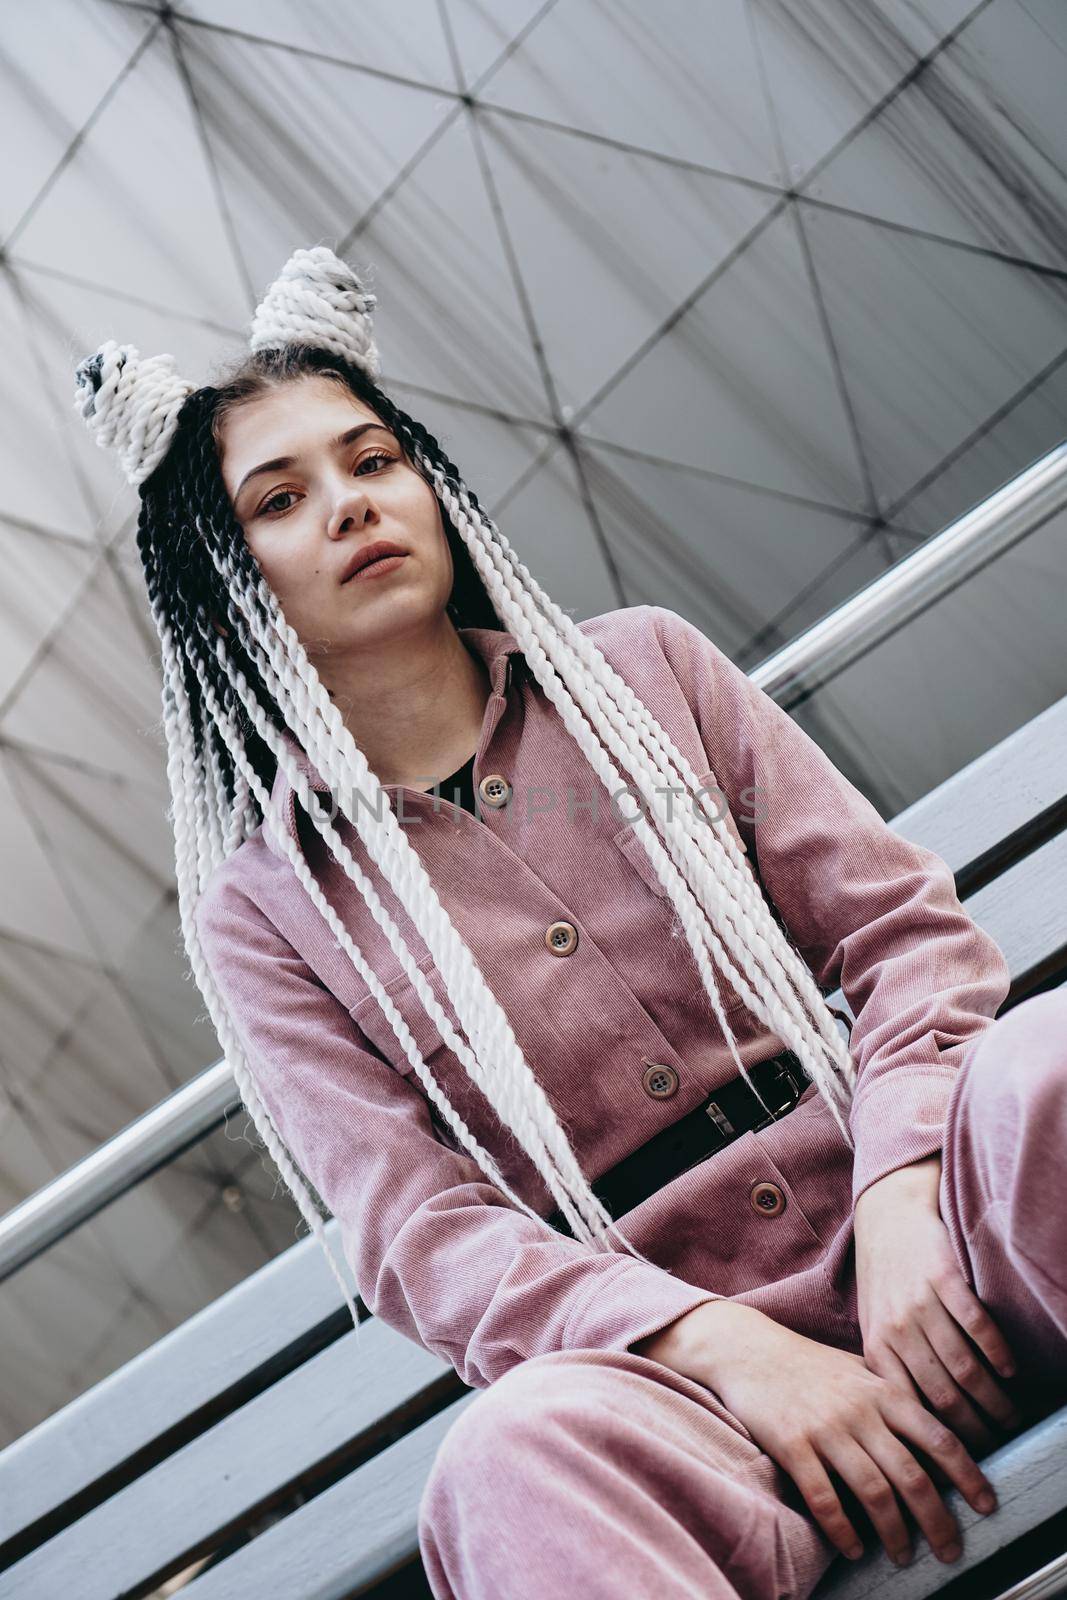 Young woman with futuristic looks. Girl with black and white dreadlocks or pigtails. Against the background of a futuristic building